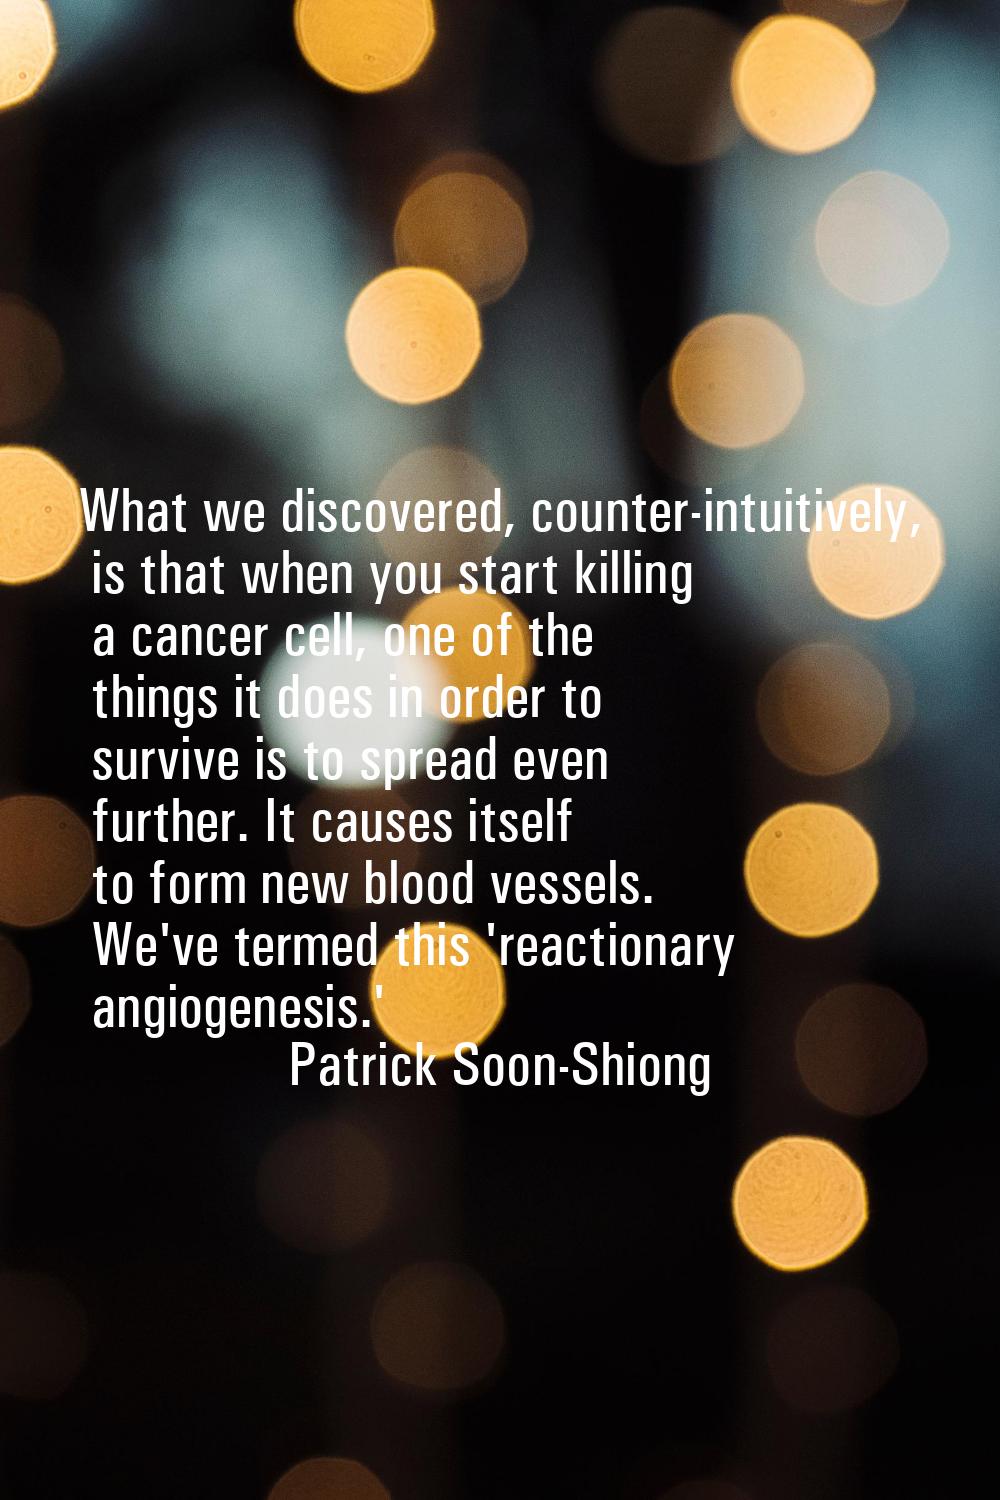 What we discovered, counter-intuitively, is that when you start killing a cancer cell, one of the t